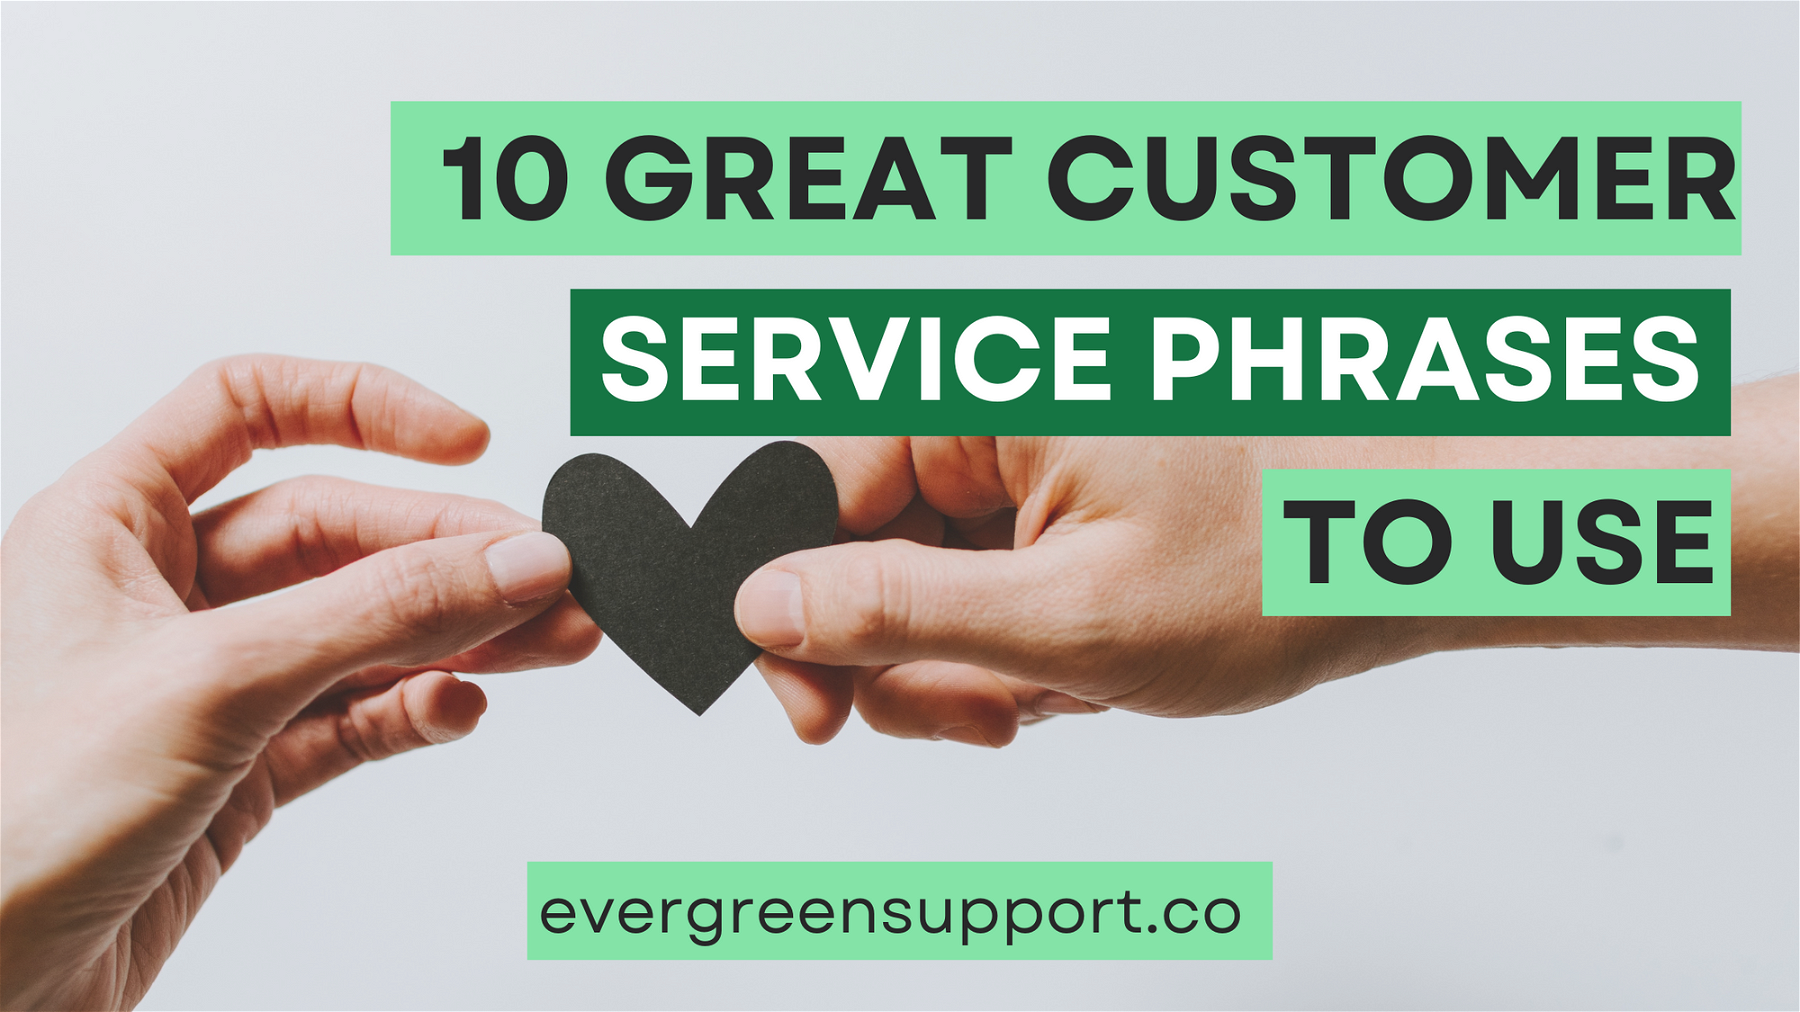 10 Great Customer Service Phrases to Use